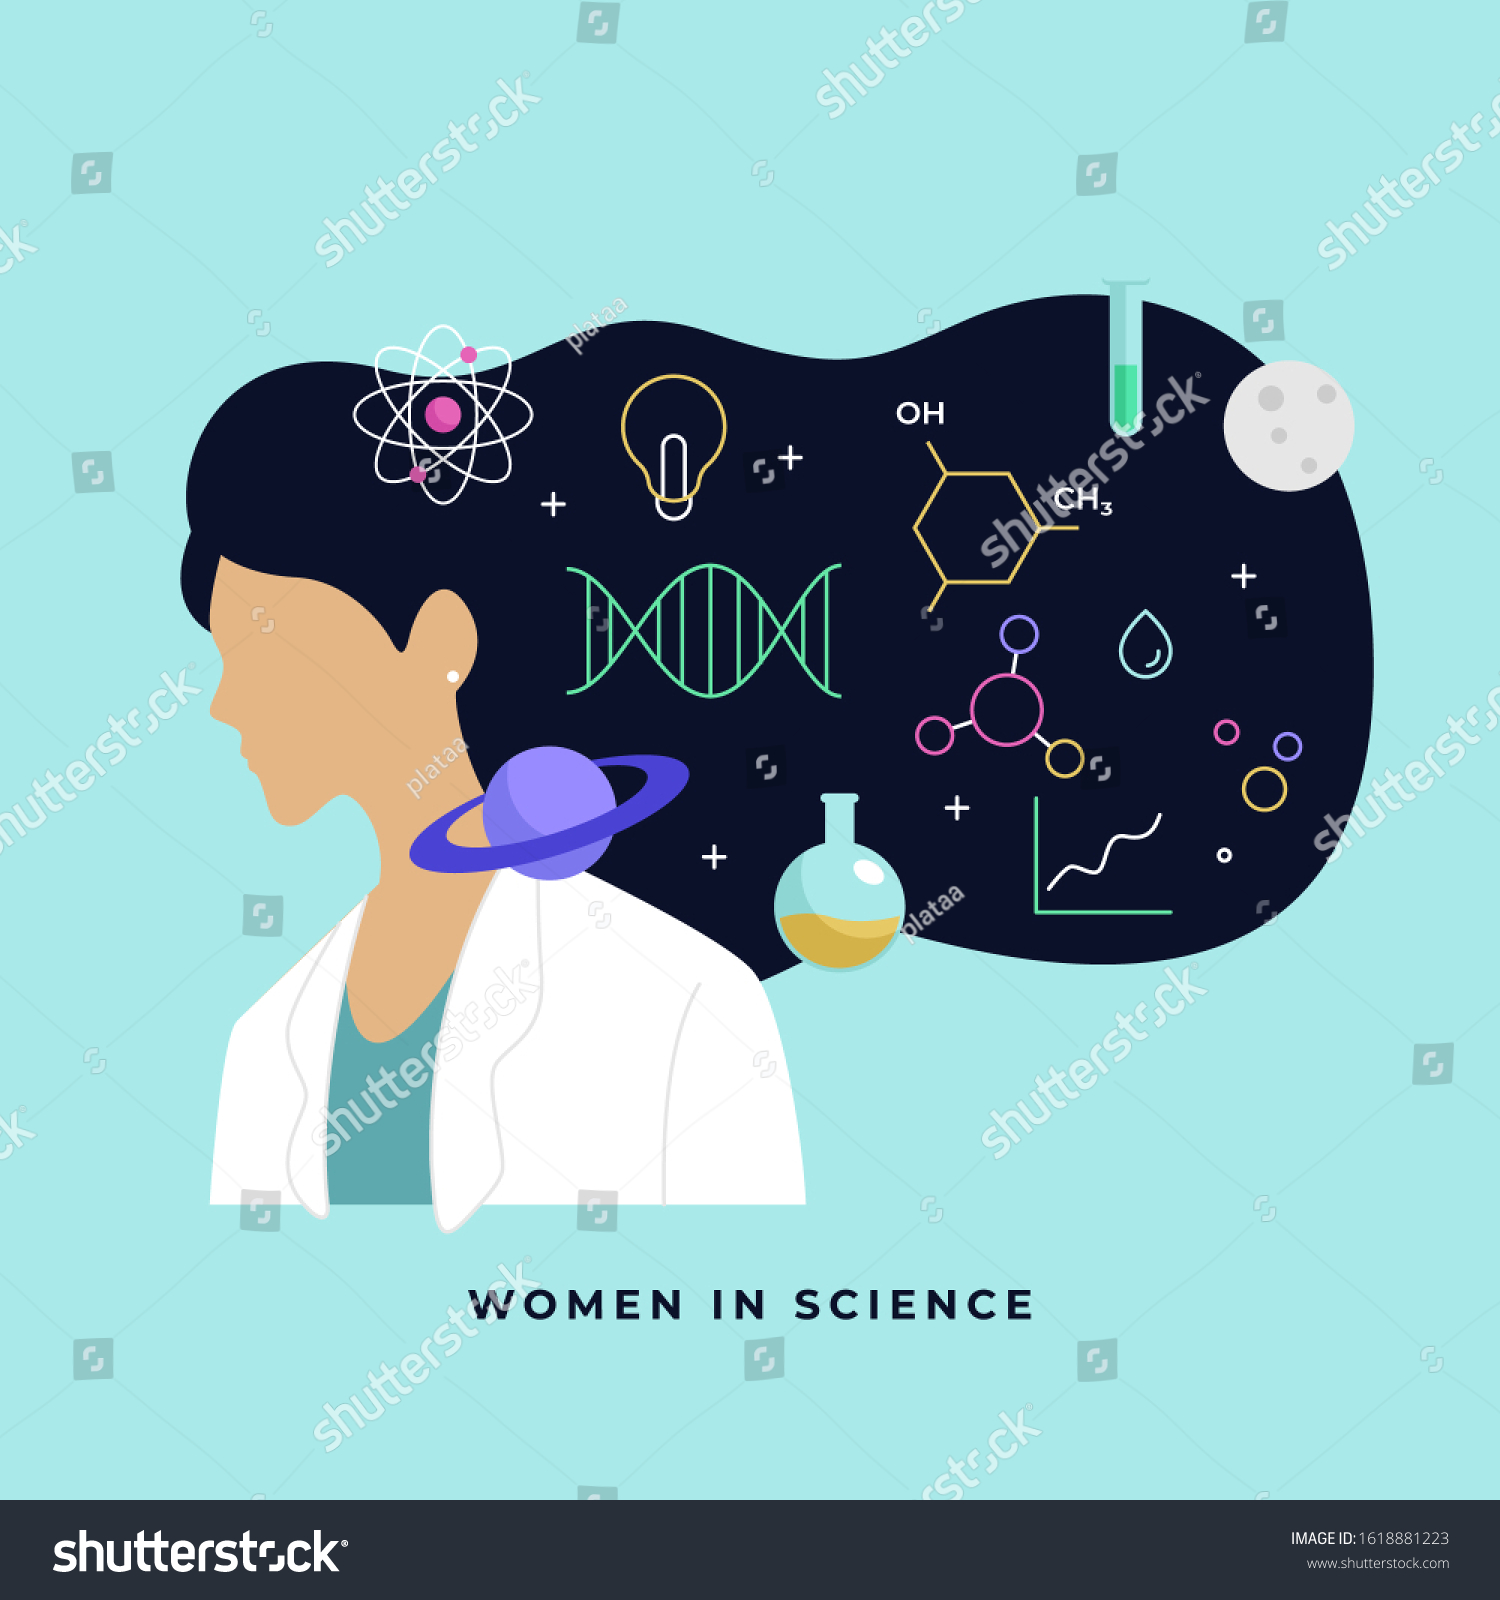 Female scientist head with long hair thinking about complex science knowledge vector illustration. International Day of Women and Girls in Science poster background. #1618881223